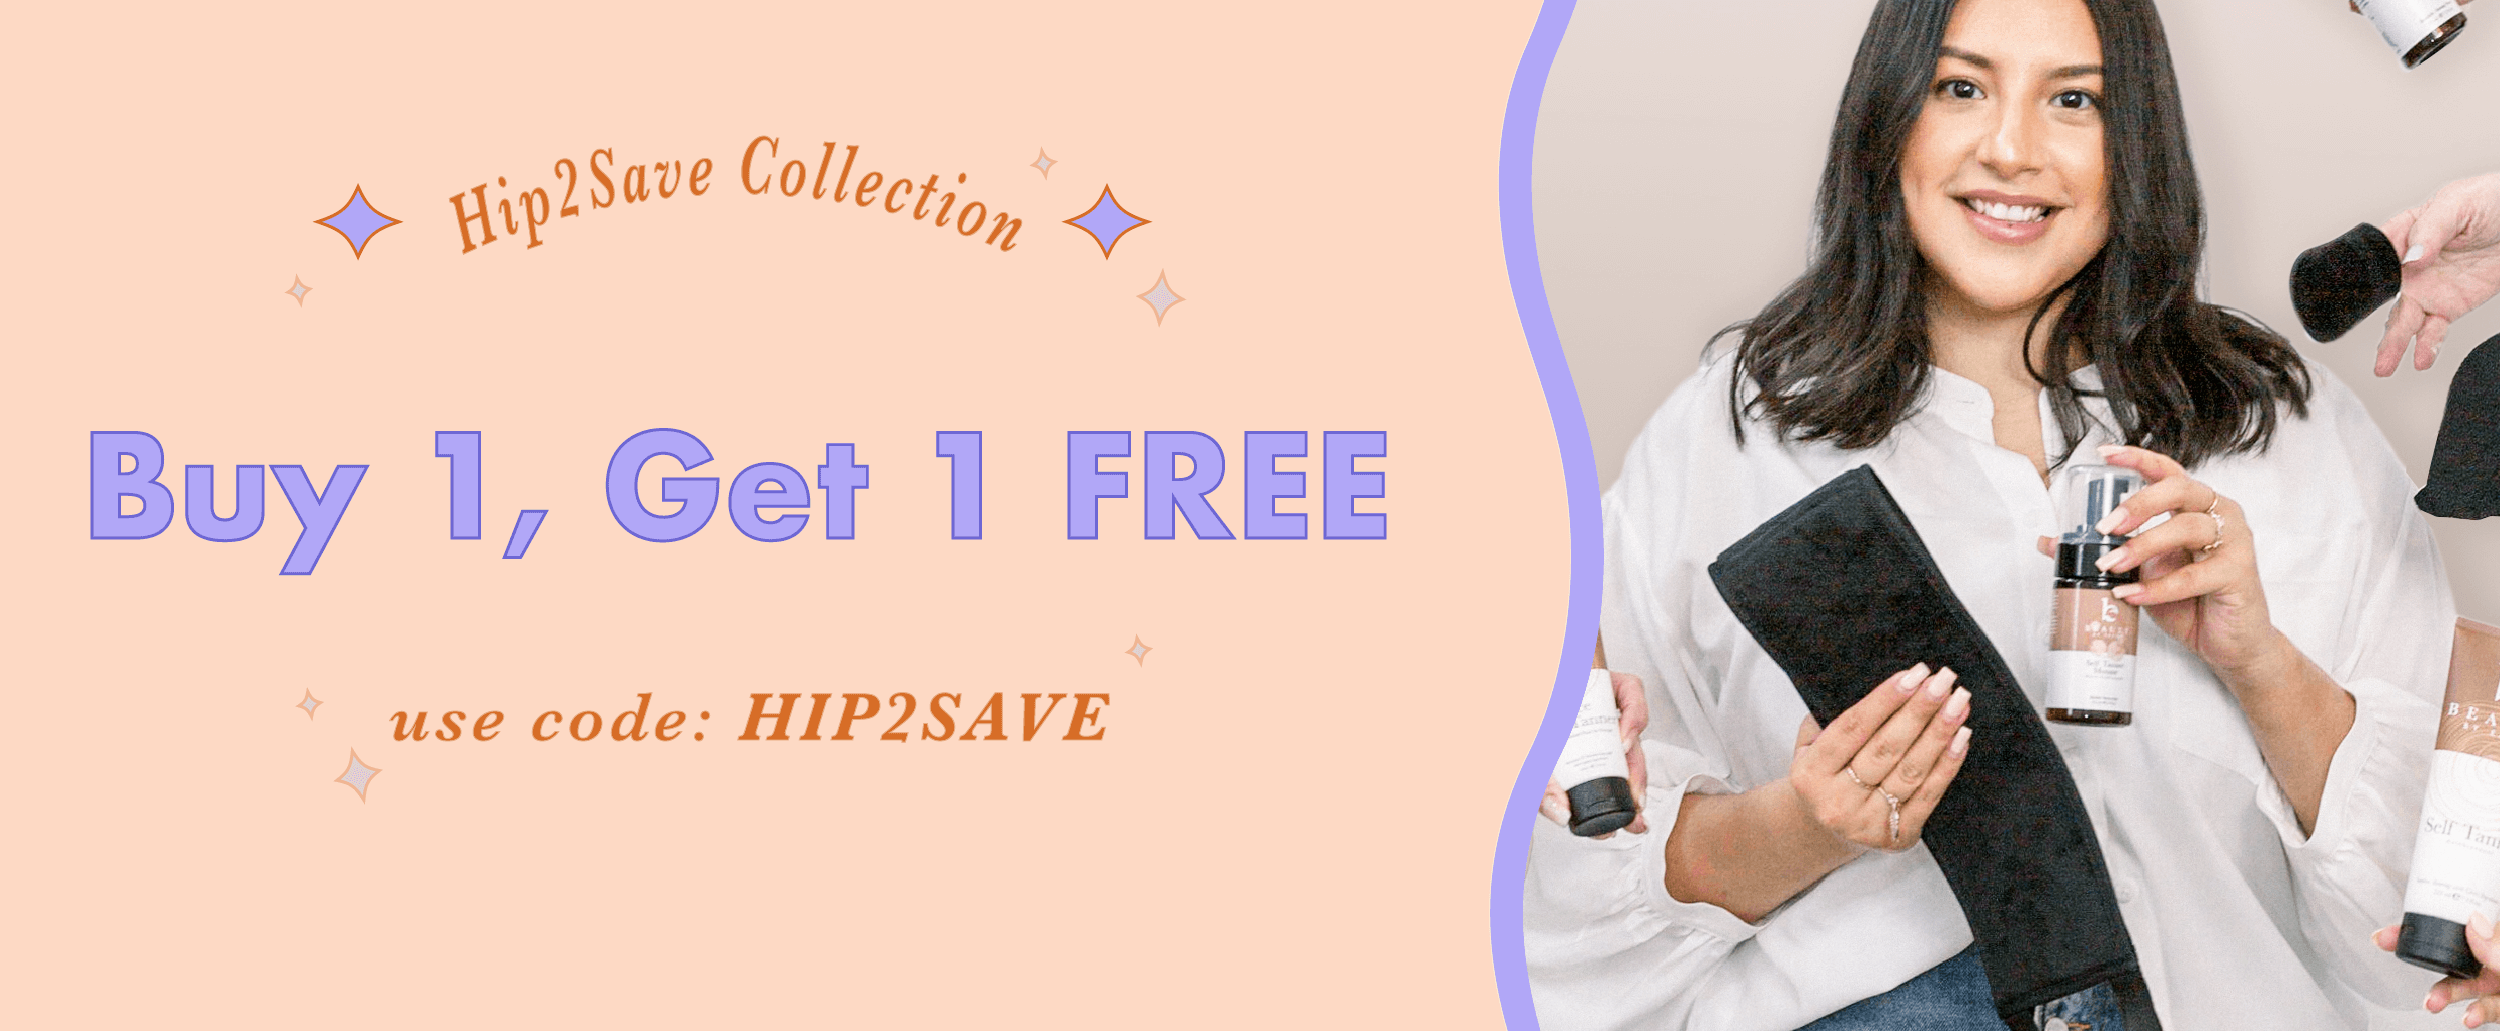 hip2save giveaway collection - Buy1 Get 1 Free (code hip2save)